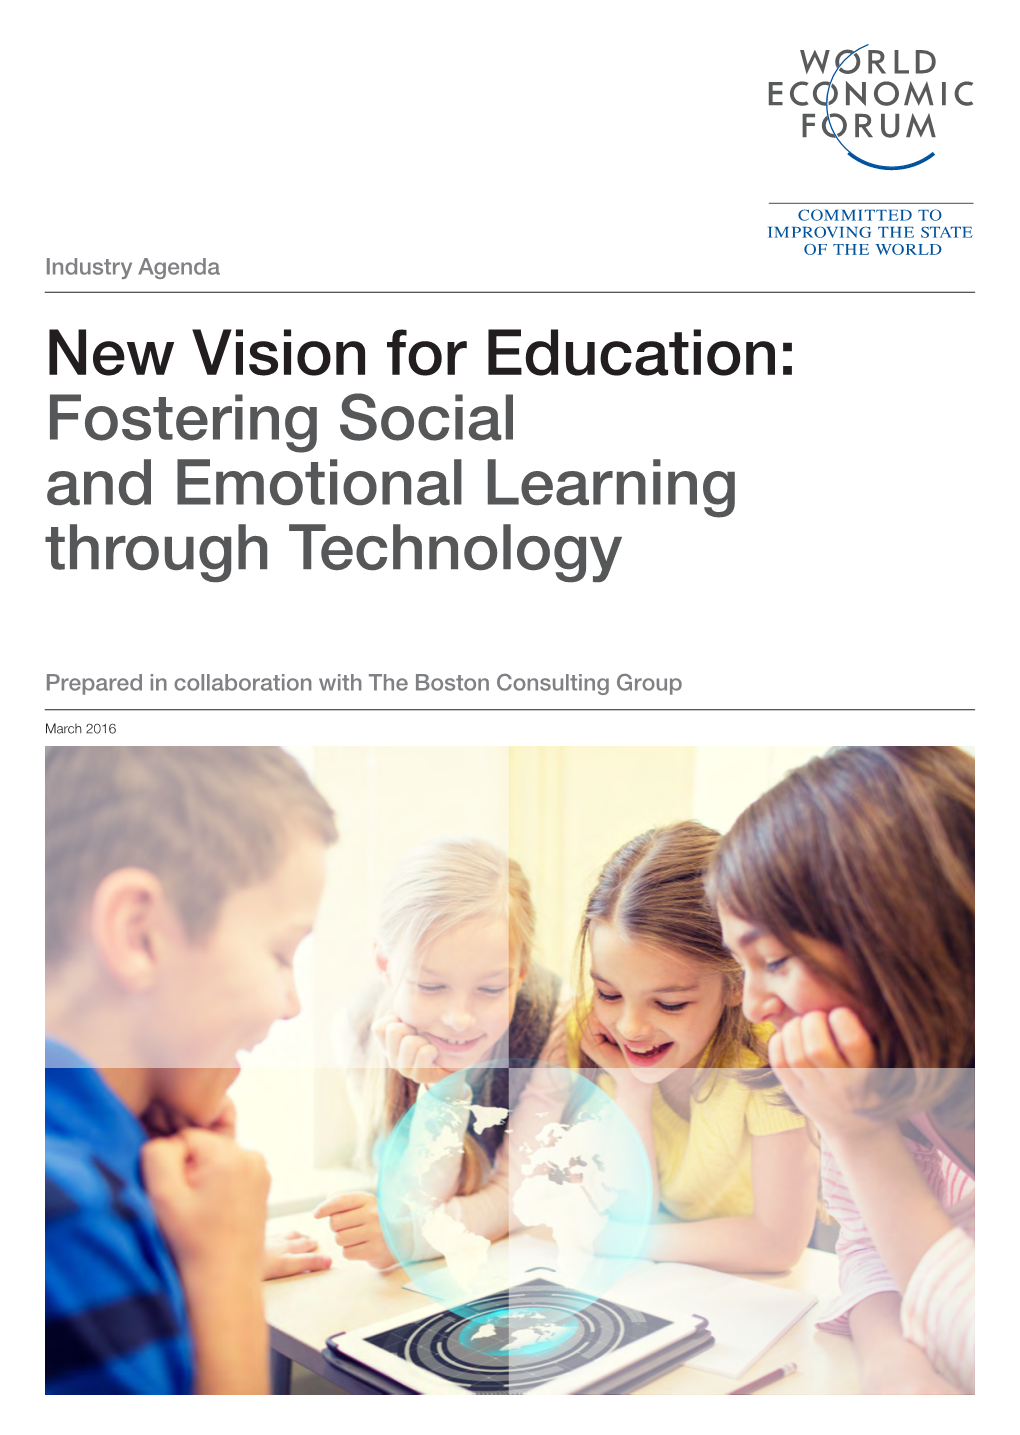 New Vision for Education: Fostering Social and Emotional Learning Through Technology